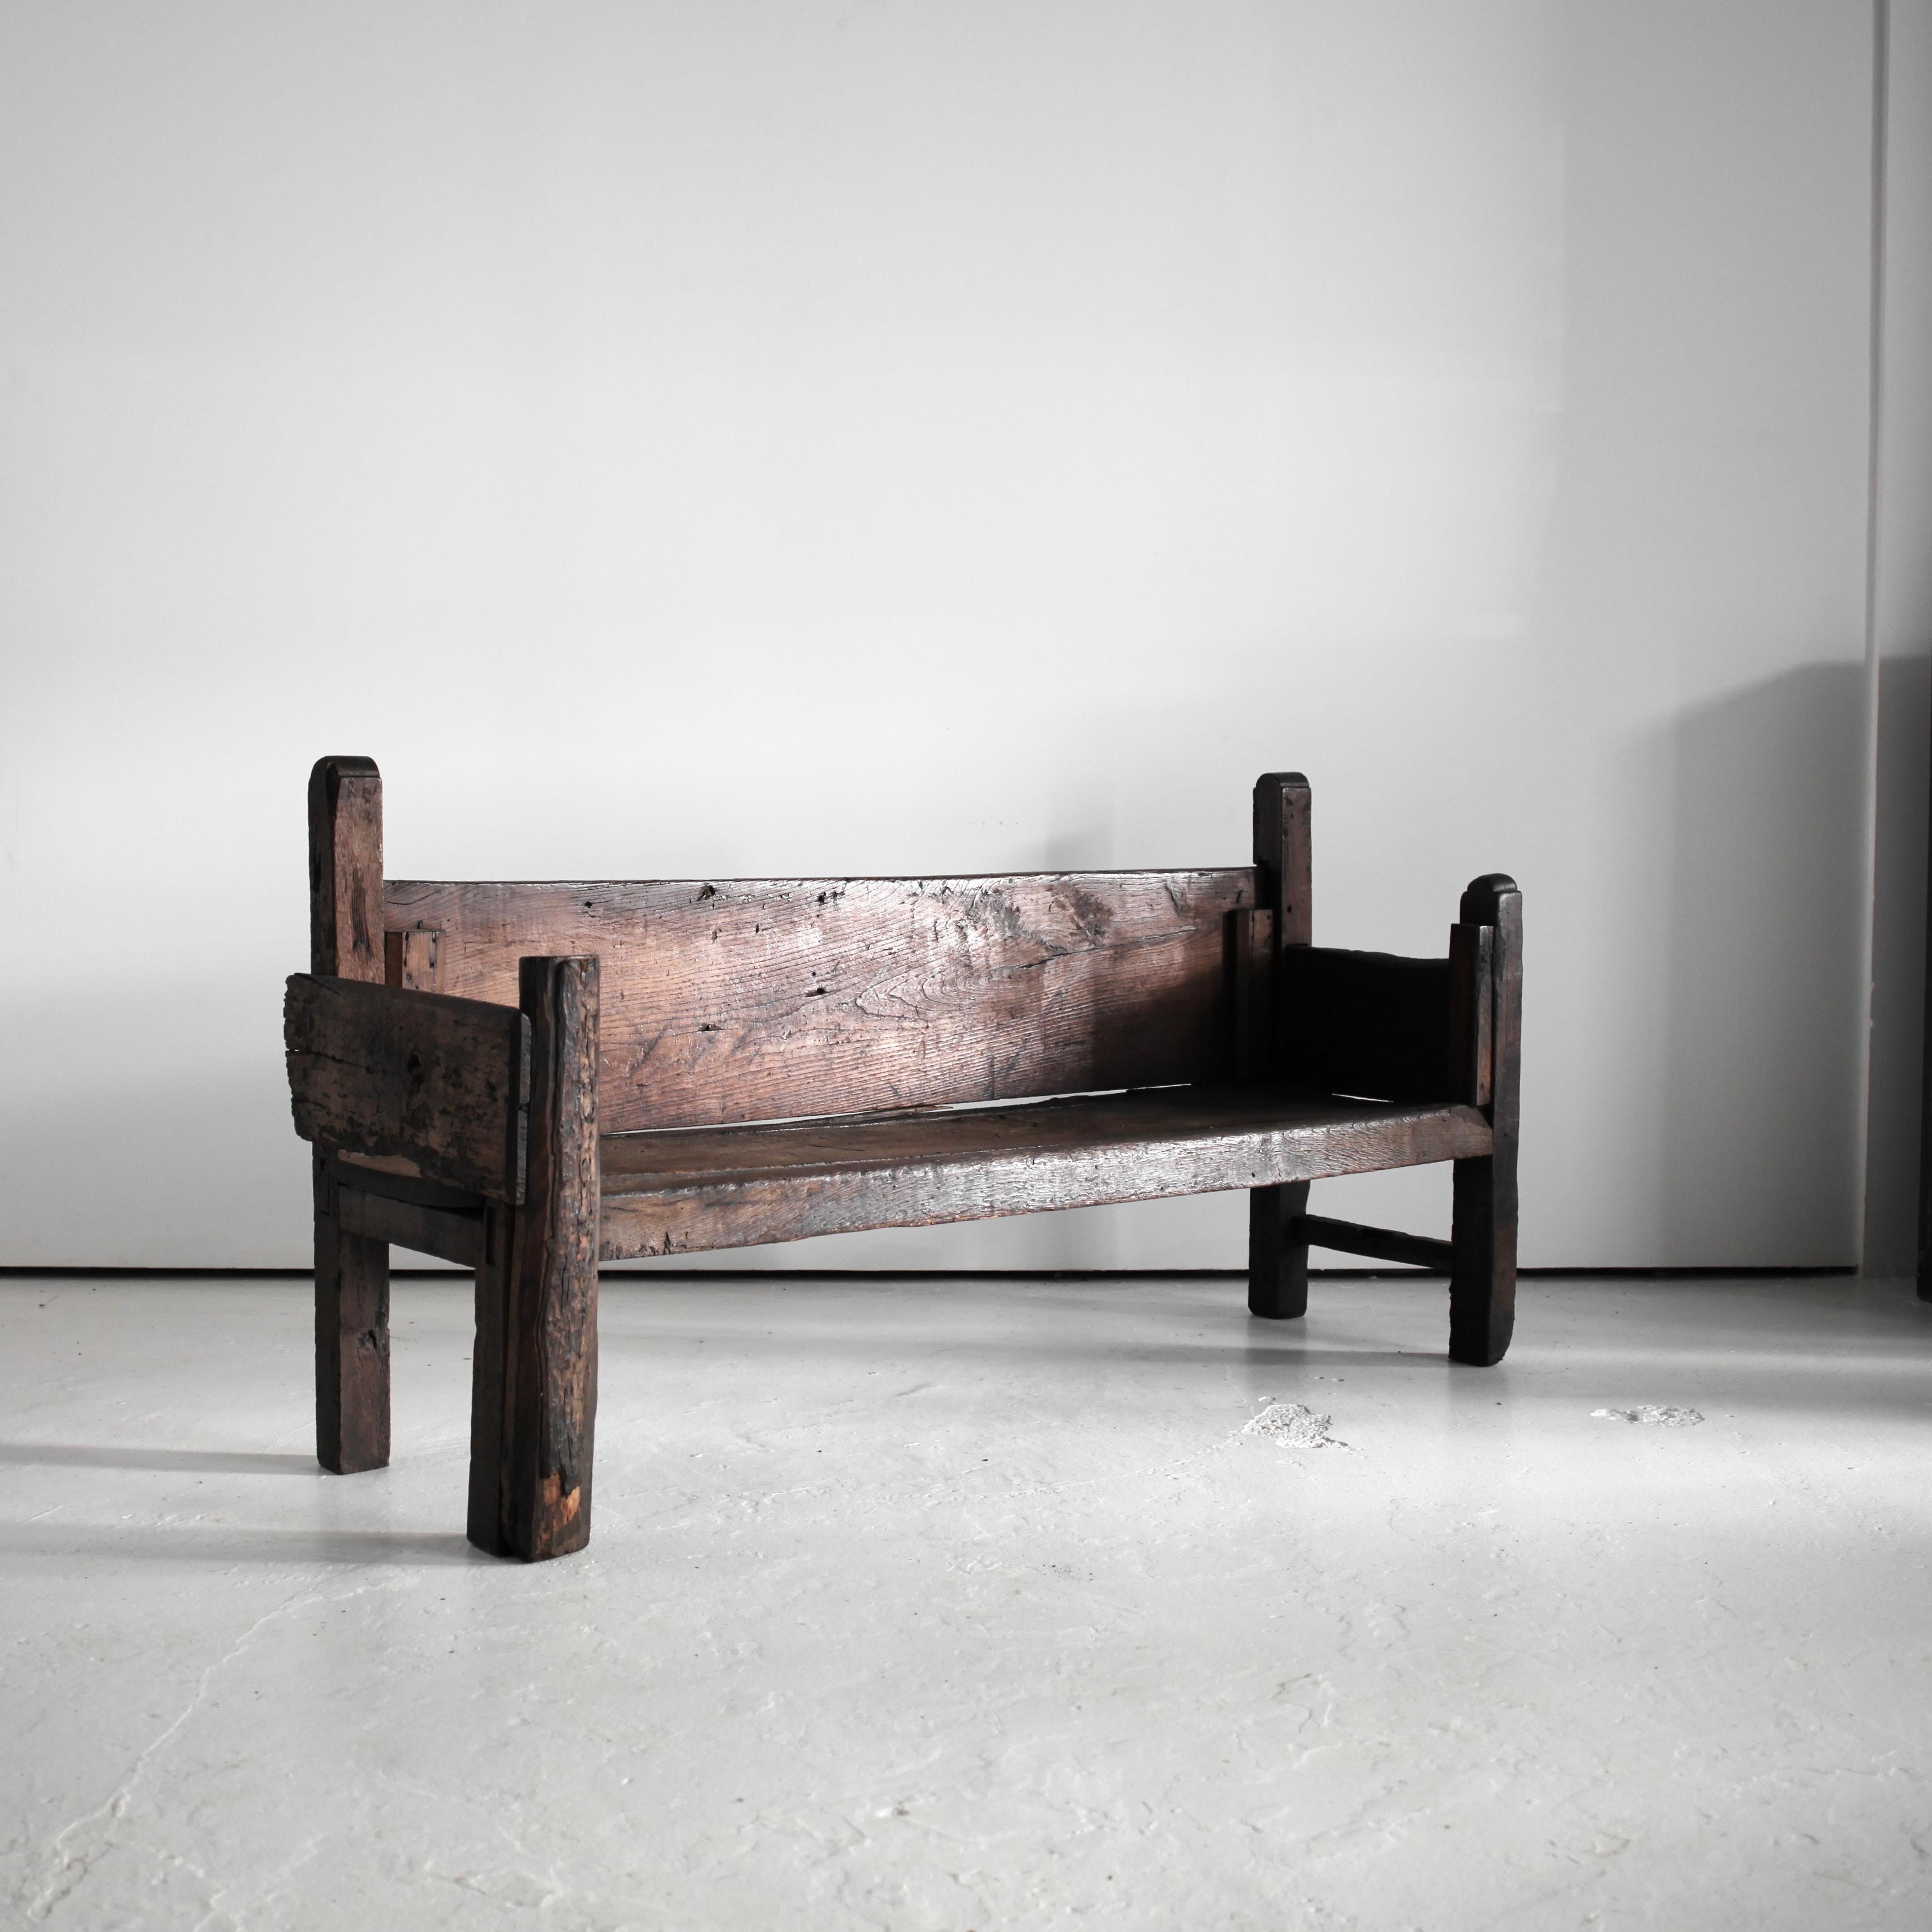 A large hewn chestnut 18th C. bench from Braga, northern Portugal.

Heavily patinated with many age old repairs.